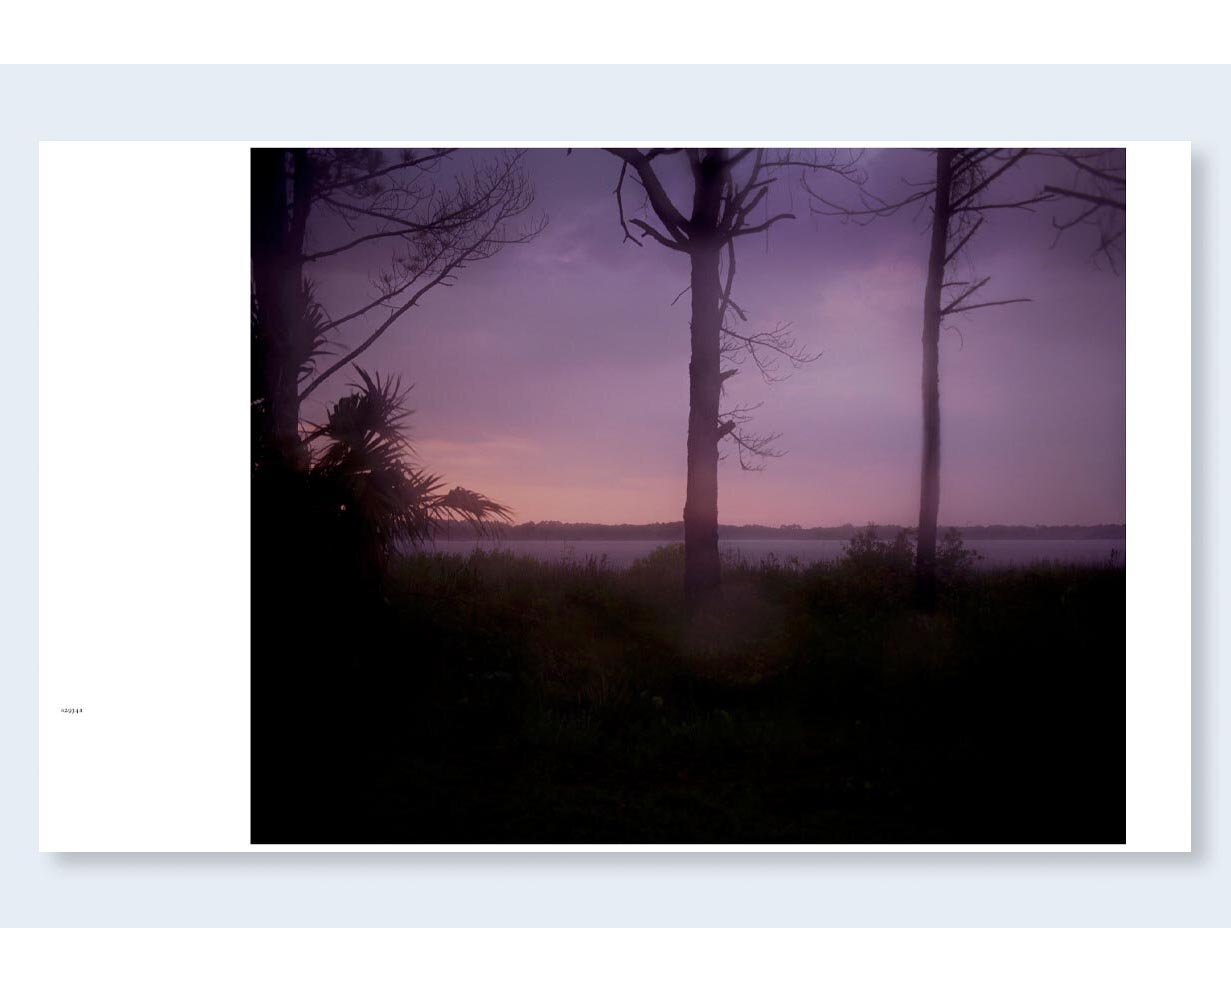 Todd Hido 'Outskirts' - Fragment